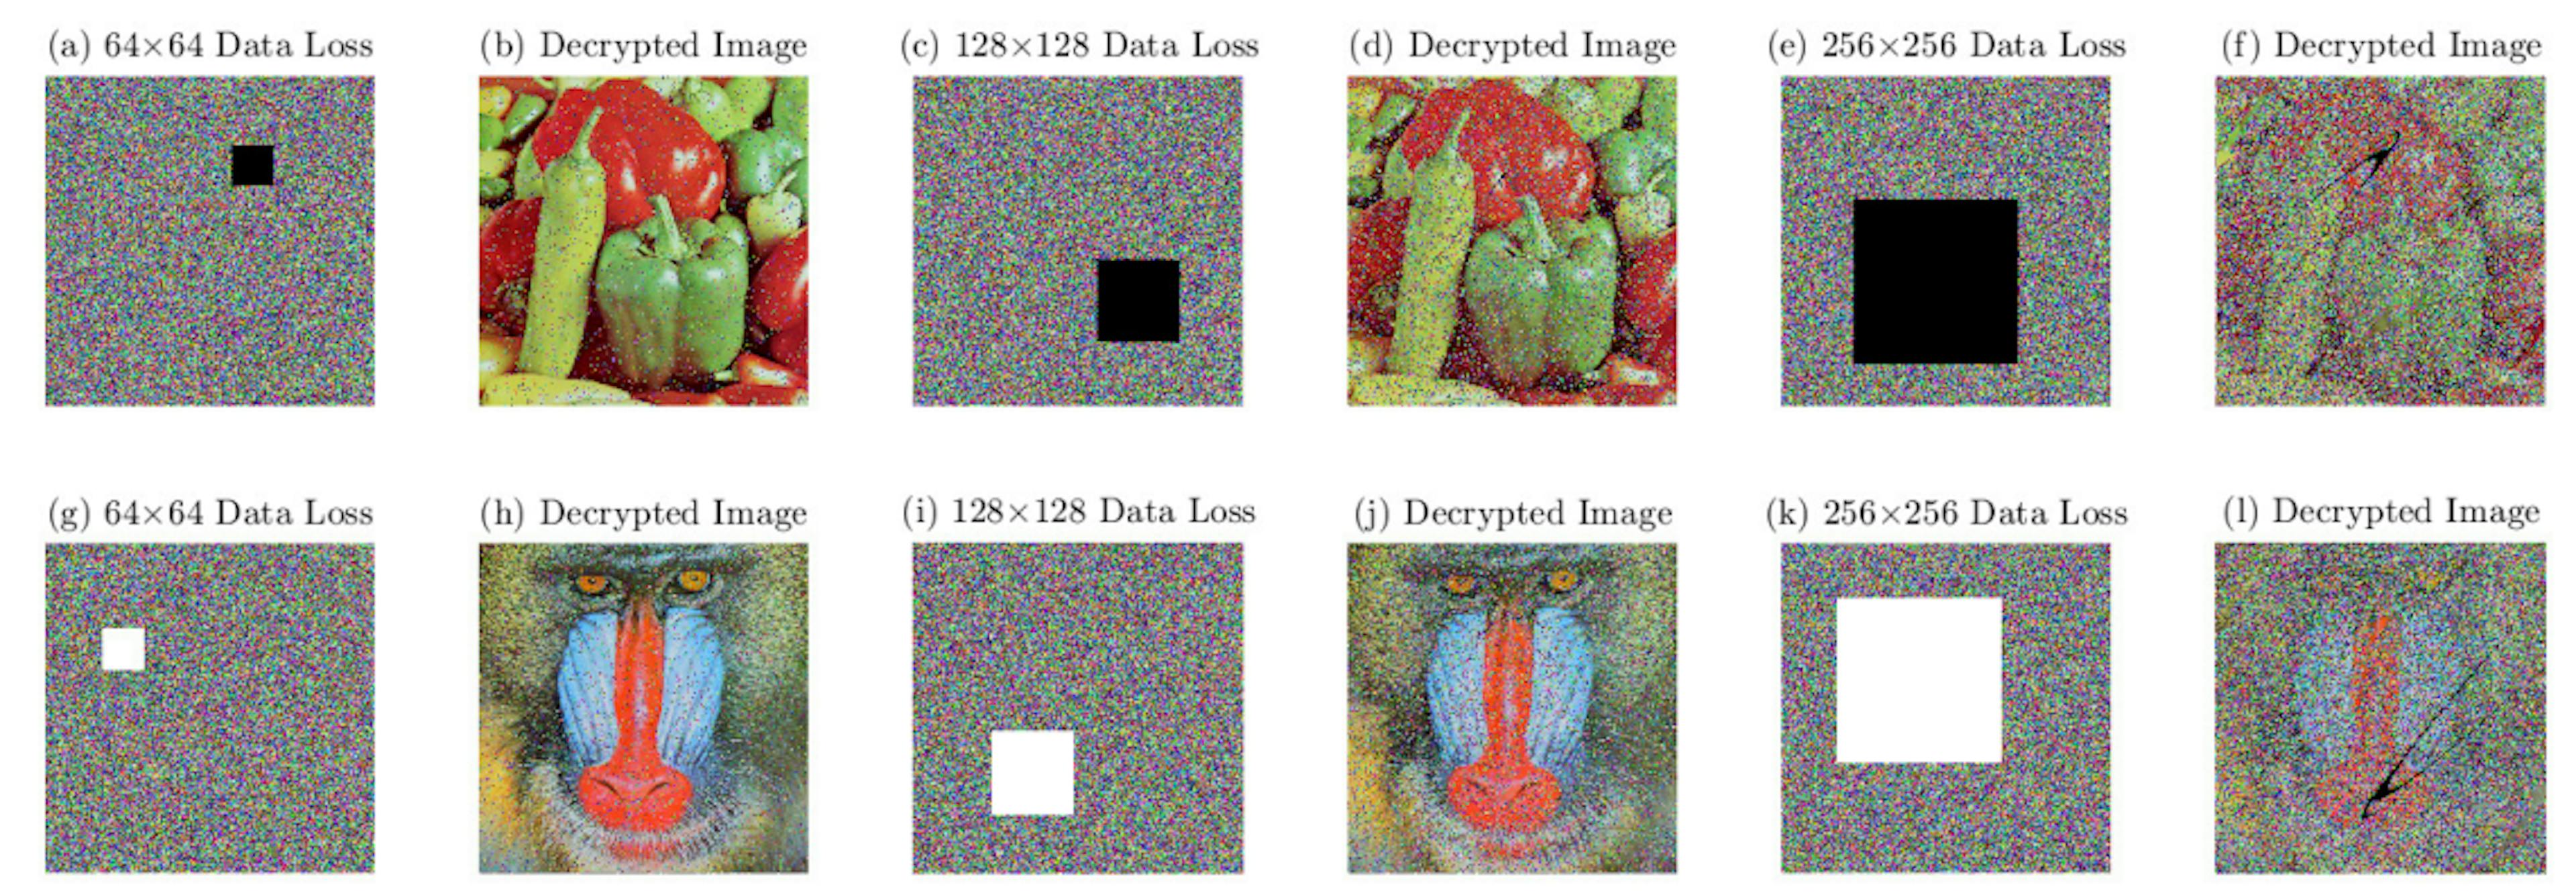 Figure 7: Resistance to data loss. (a)-(f) cipher images with different data losses and the corresponding images decrypted with PLCM, (g)-(j) cipher images with different data losses and the corresponding images decrypted with 2DLASM.